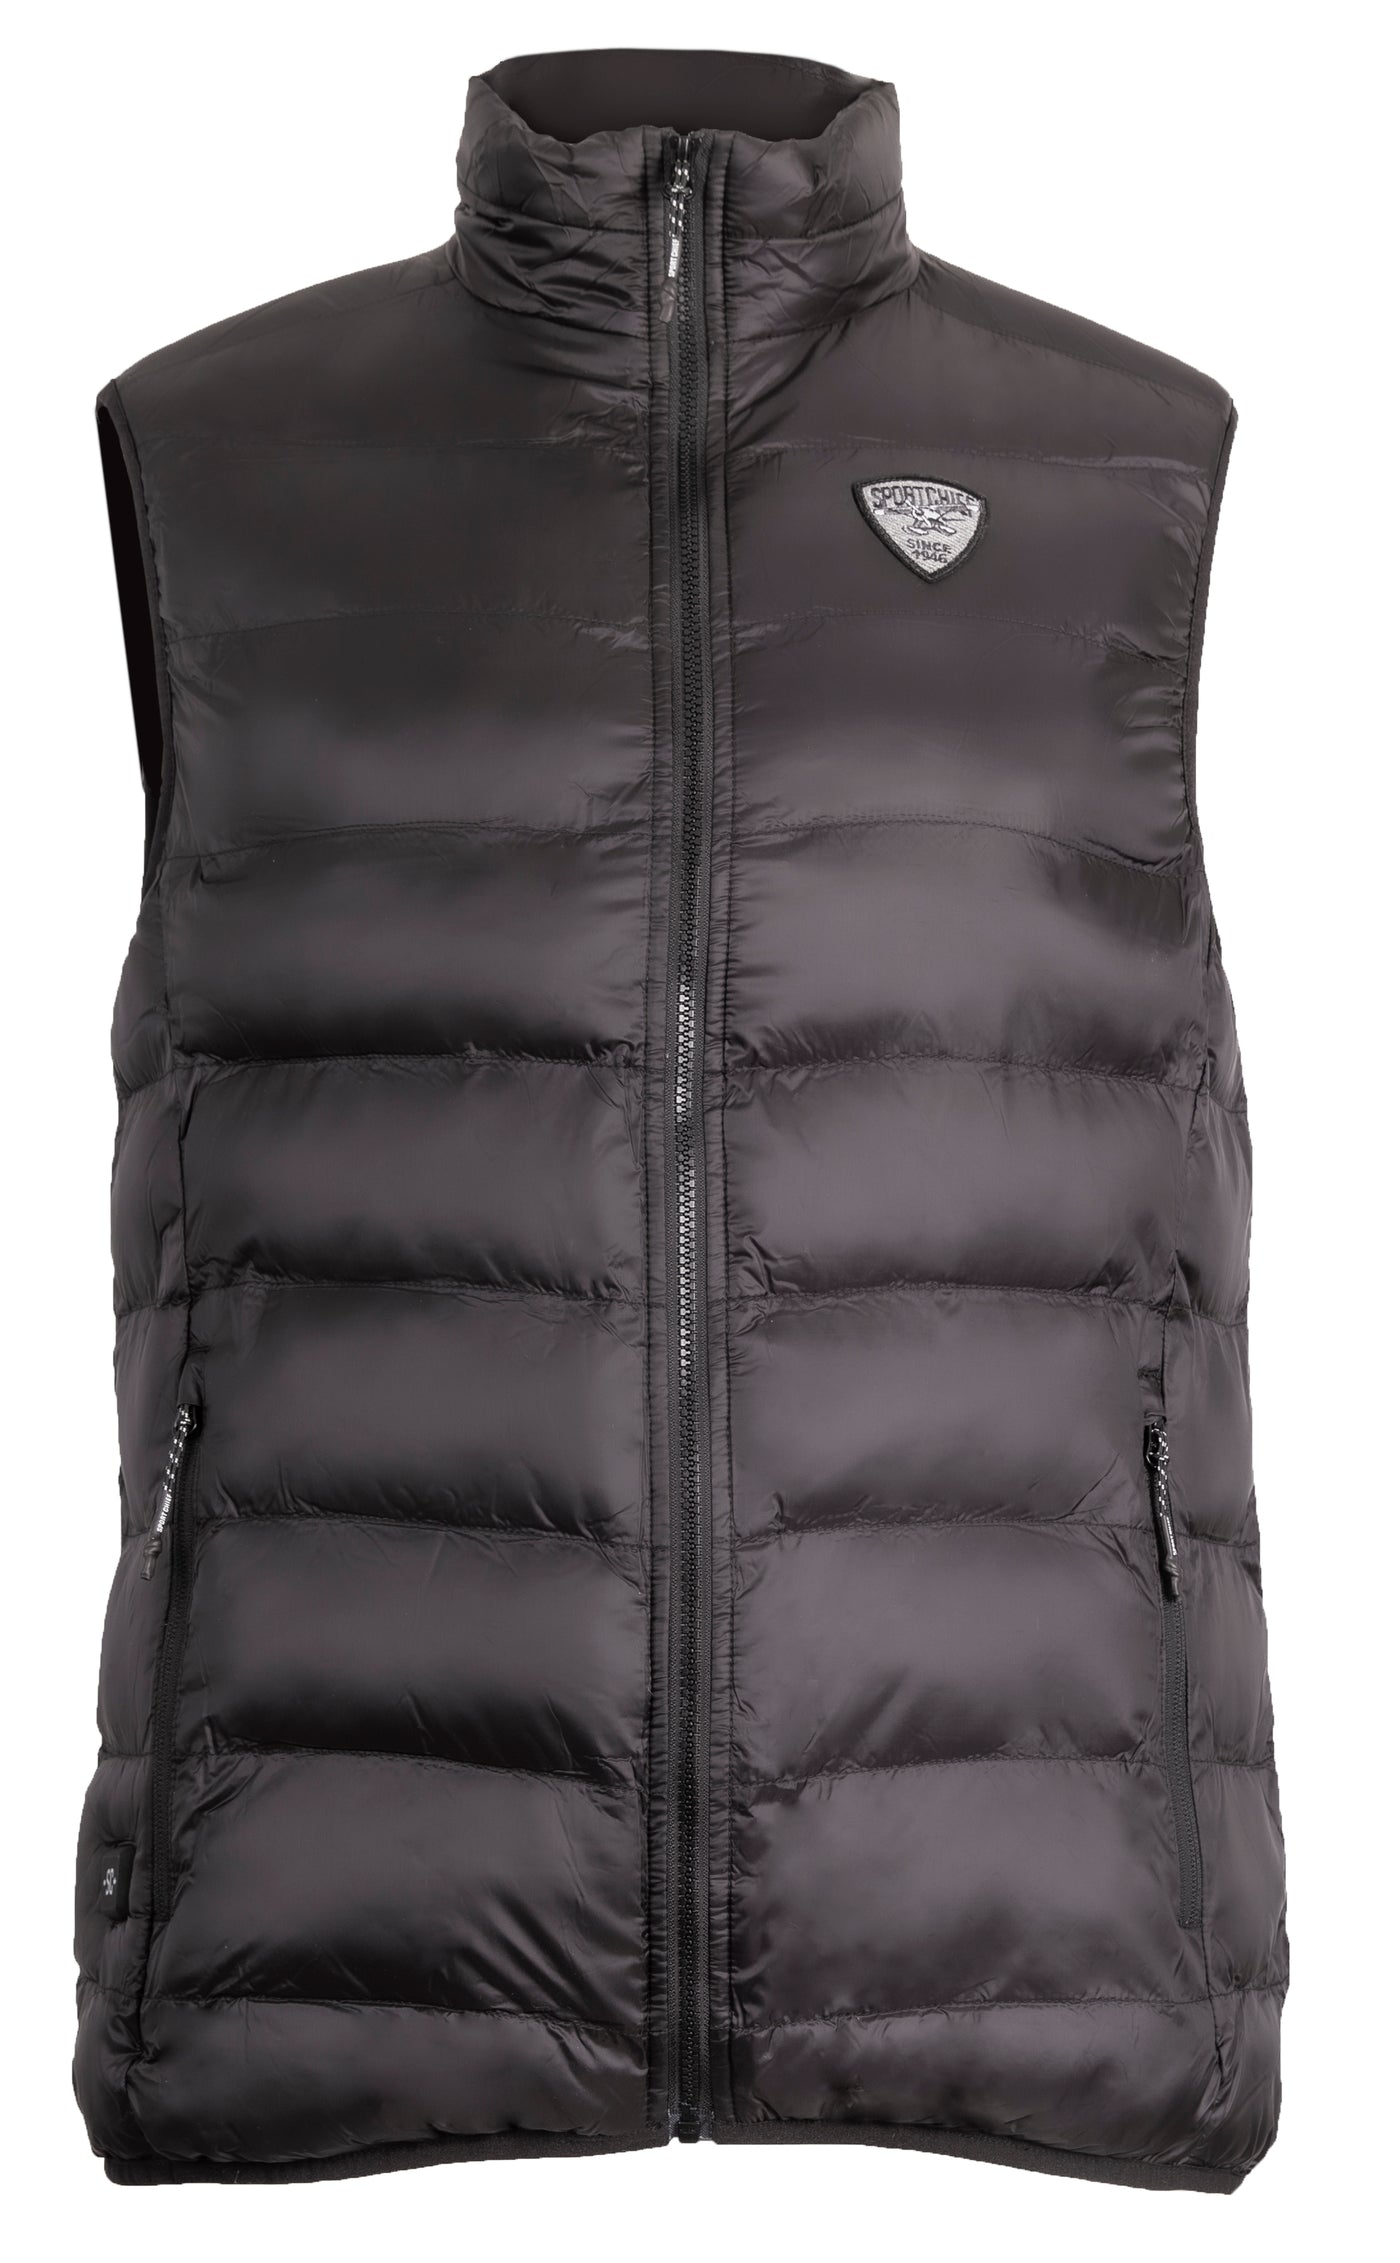 Men's heated sleeveless jacket with BlueTooth - SPORTCHIEF